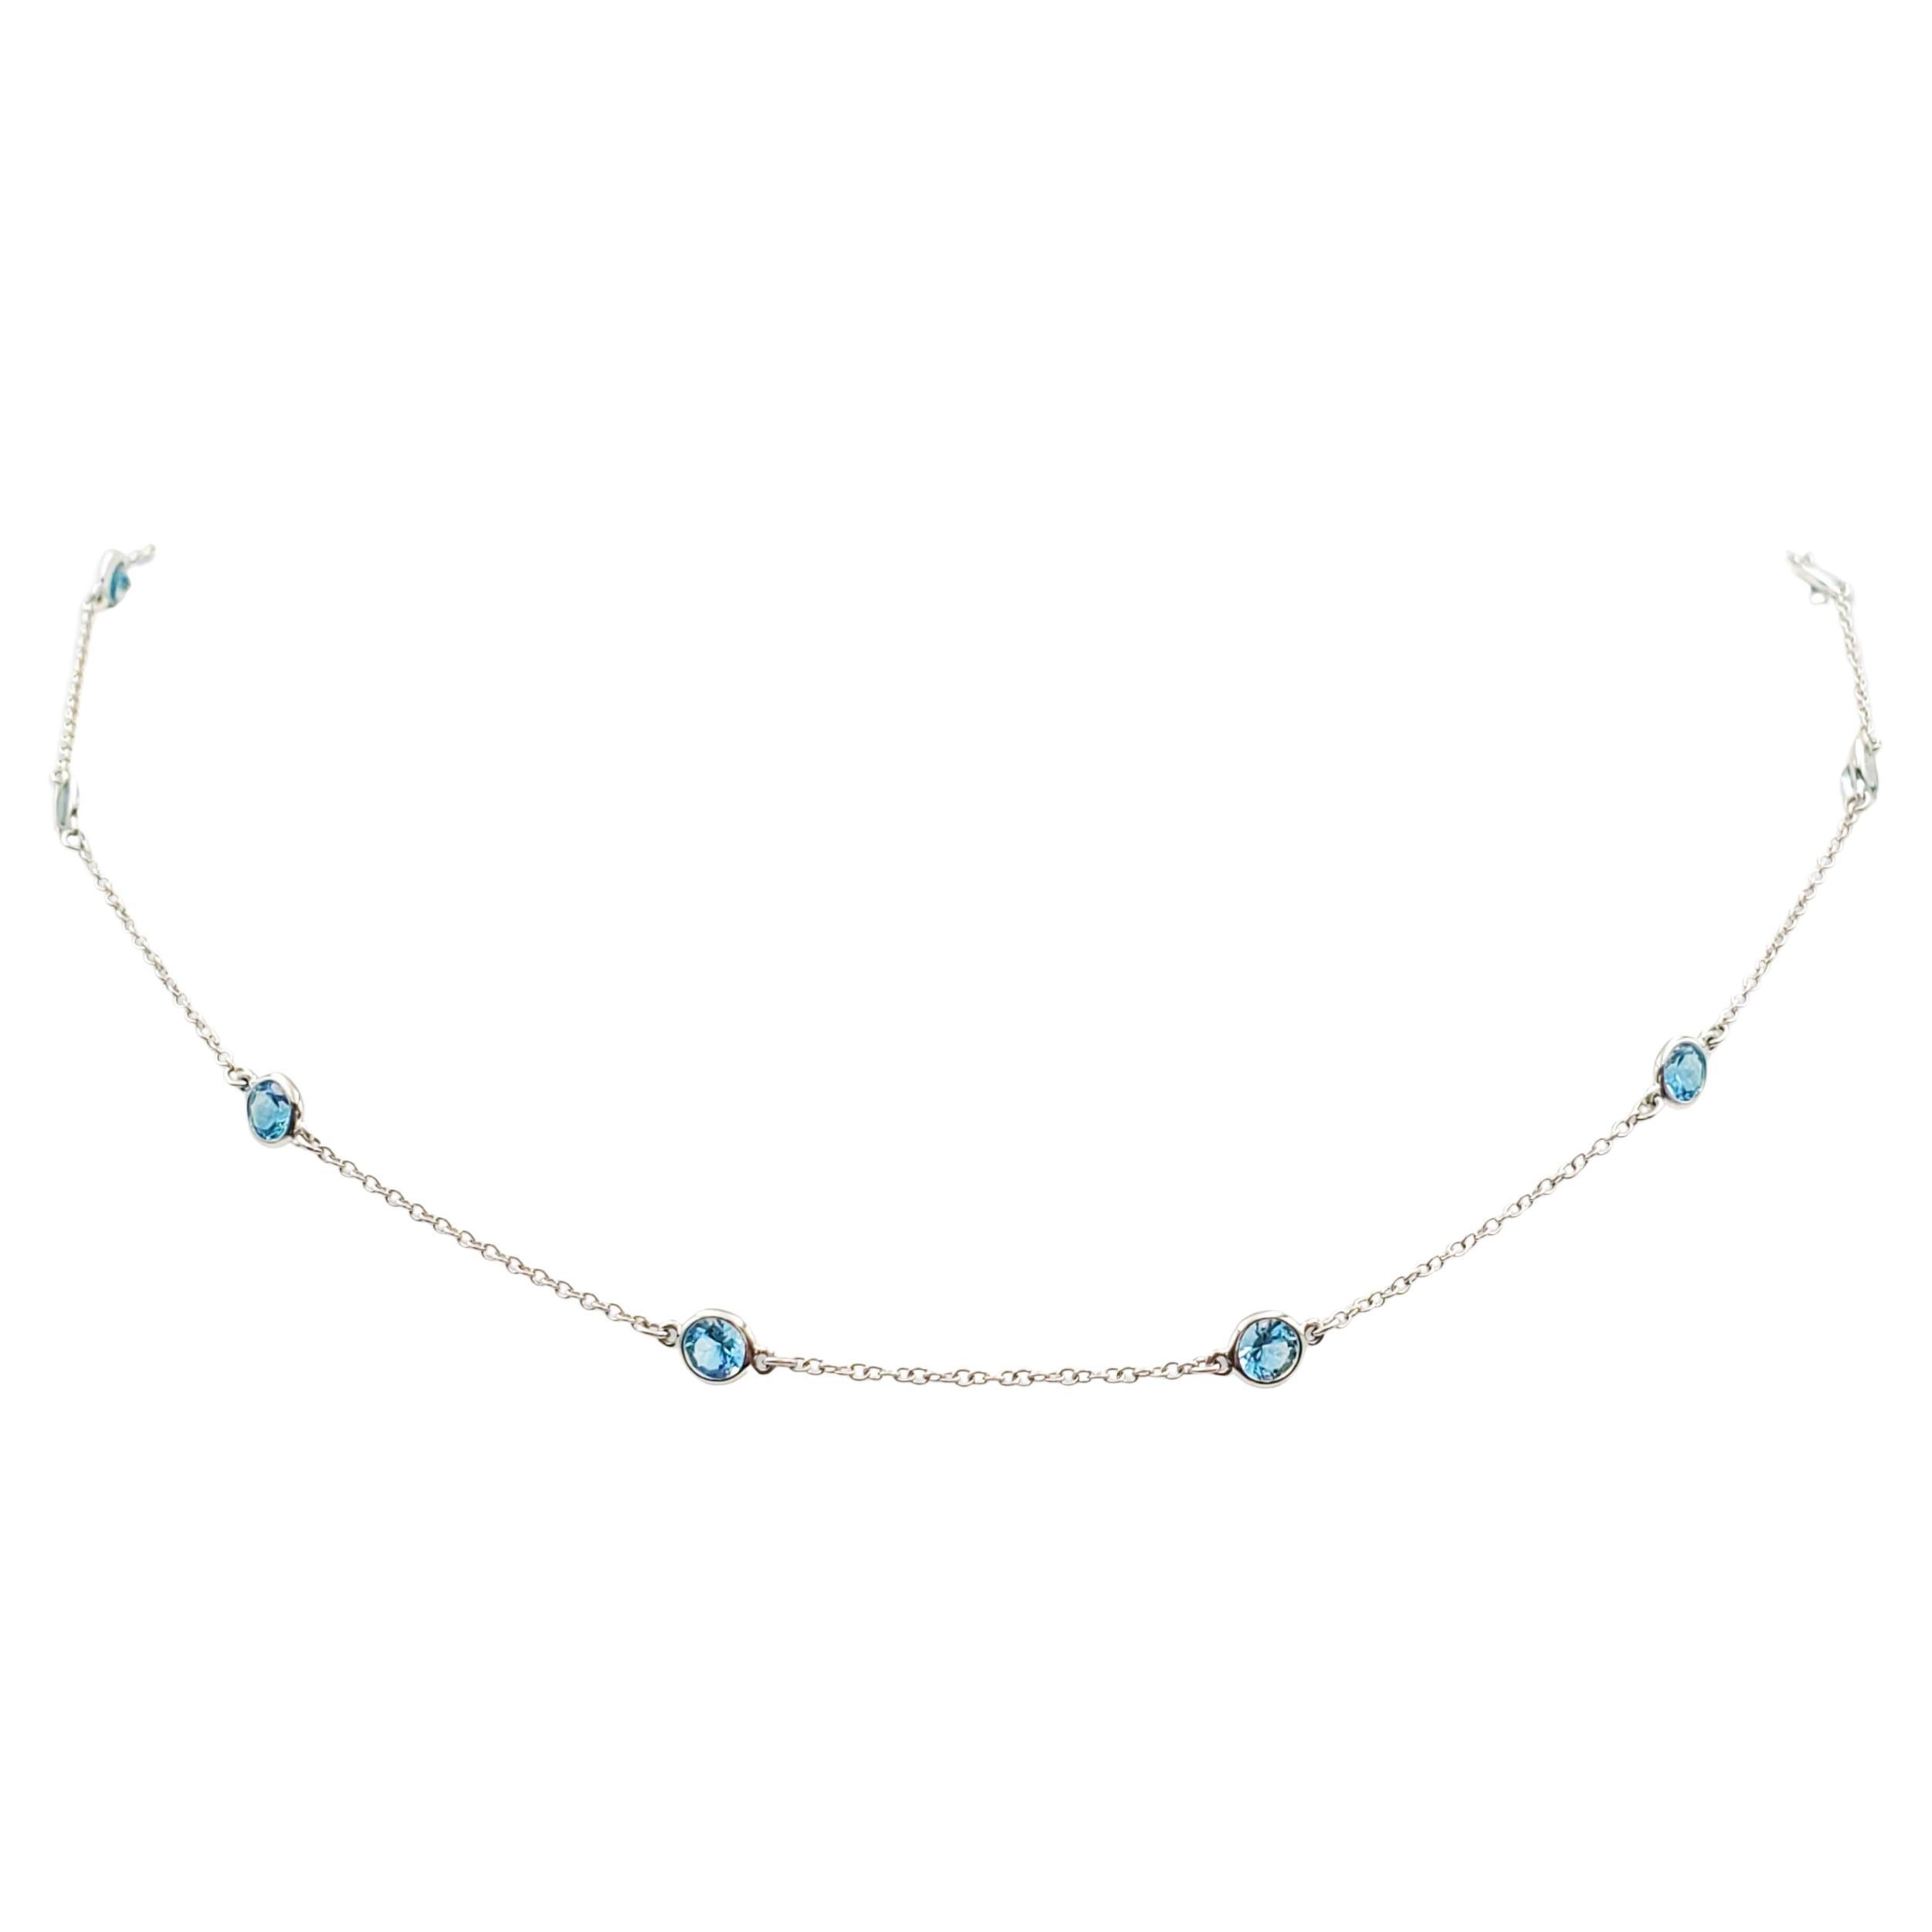 Elsa Peretti for Tiffany & Co. Collier d'aigue-marine « Color by the Yard »